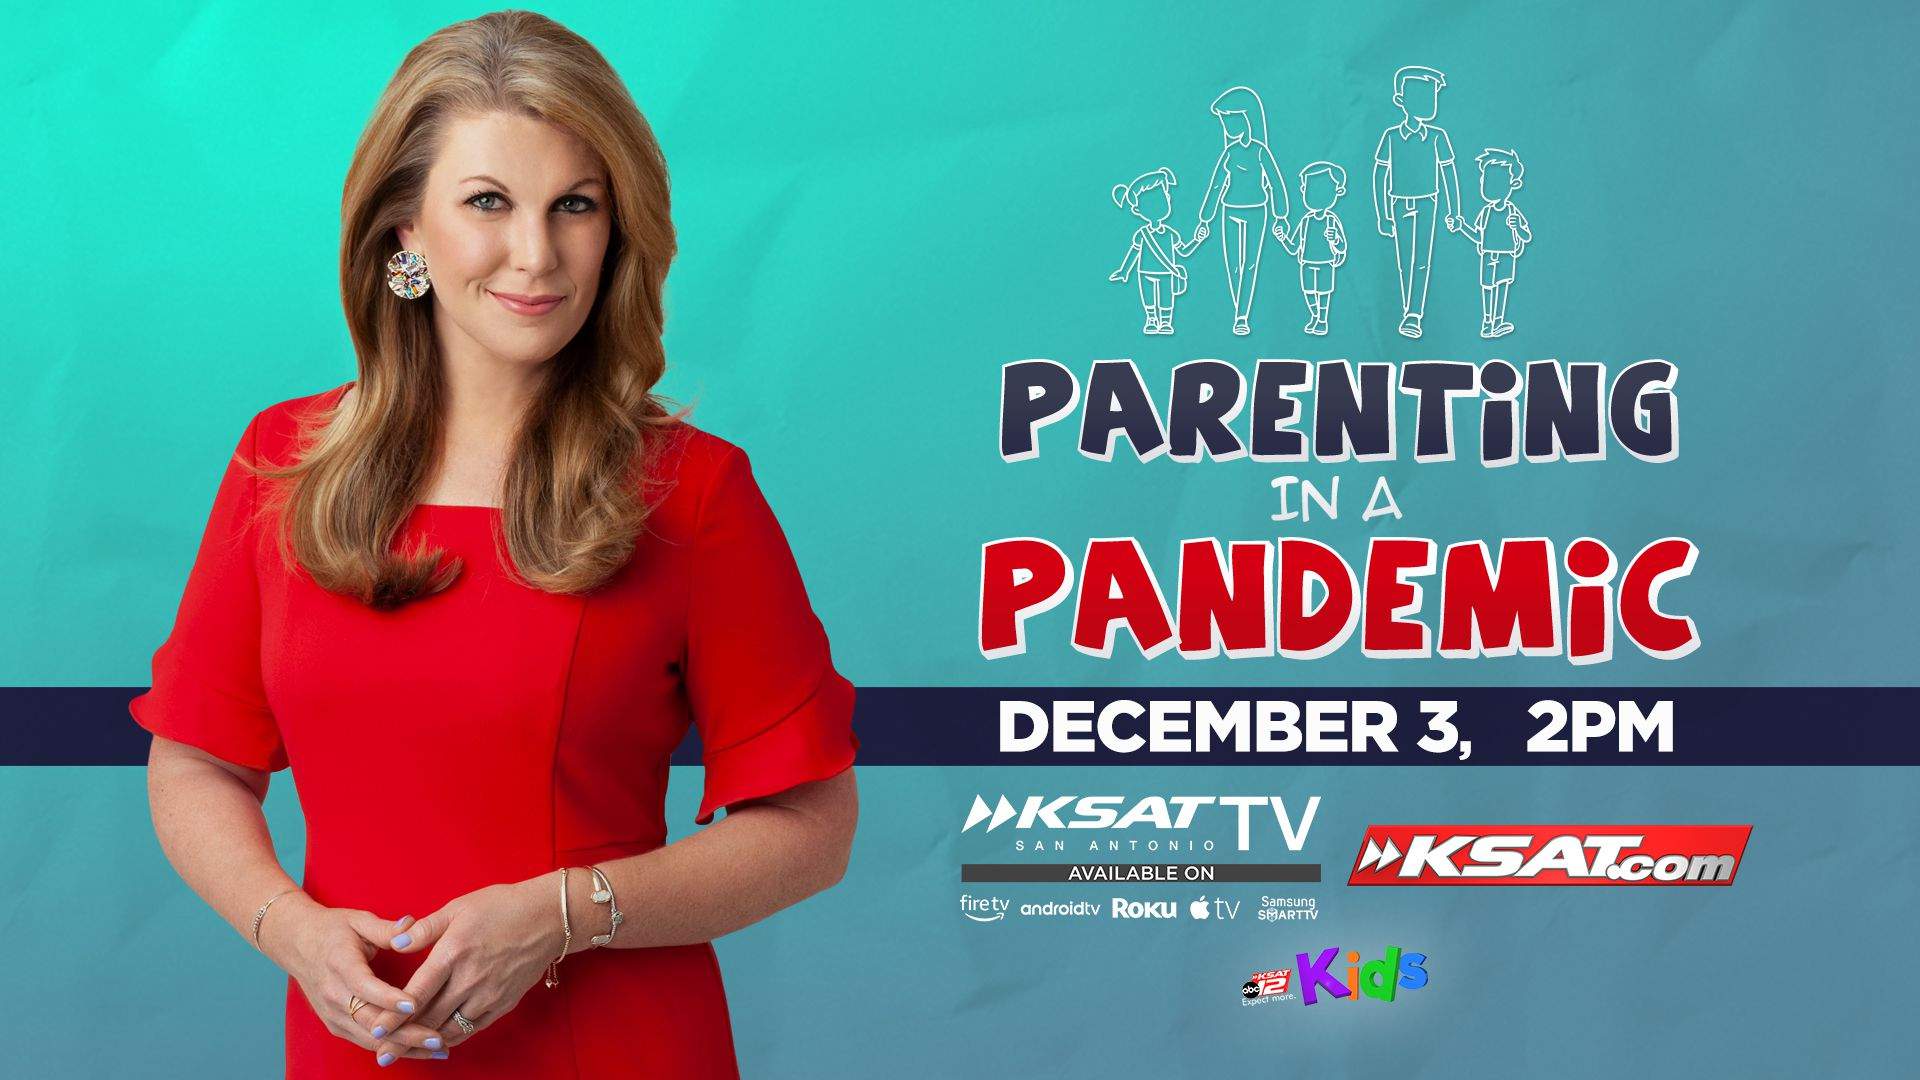 4 takeaways from KSAT’s ‘Parenting in a Pandemic’ livestream